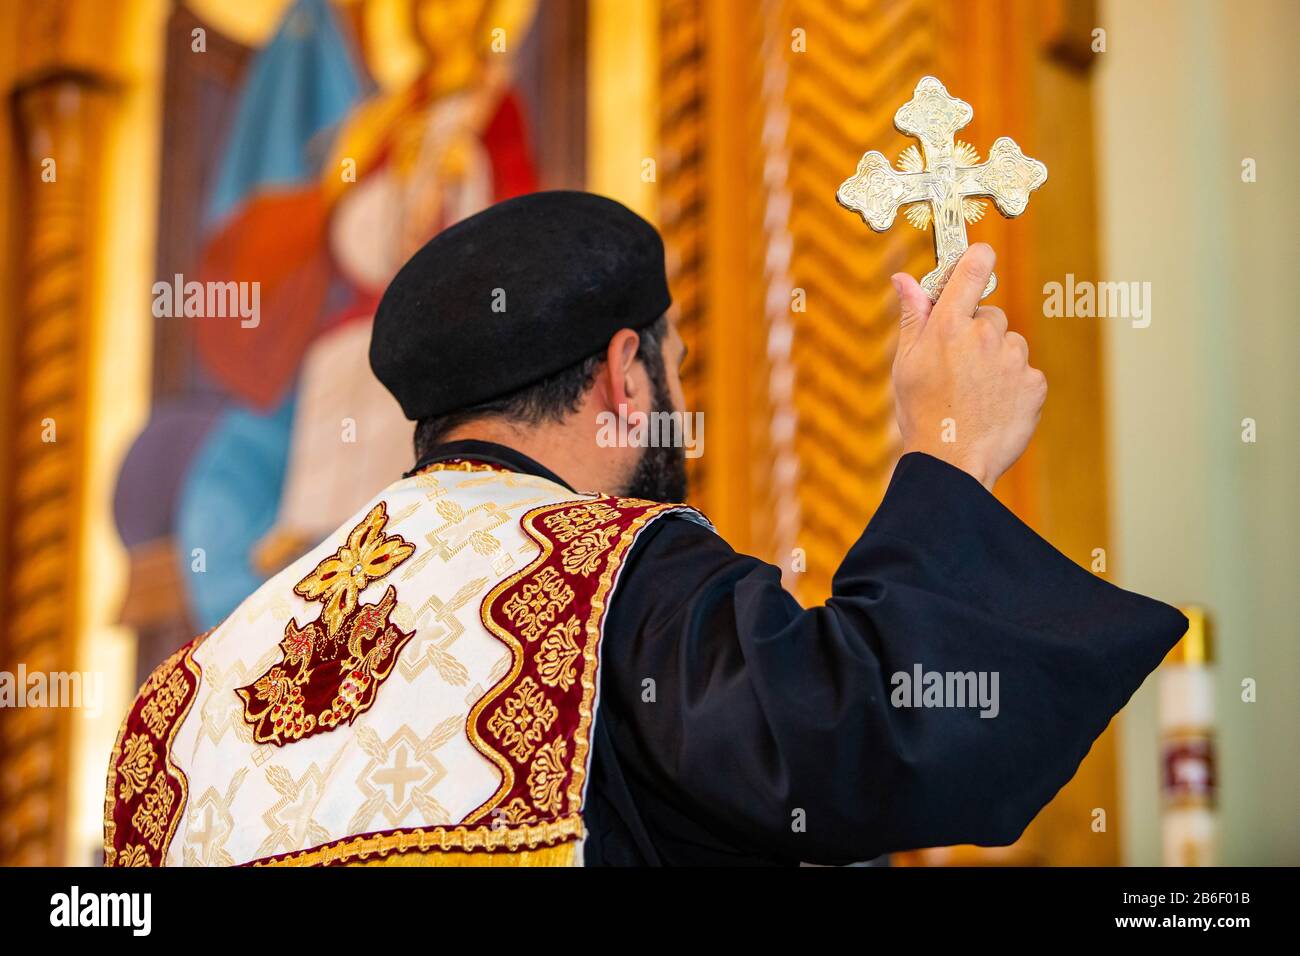 Holy father priest holding a golden cross symbol during sacred ceremony Stock Photo